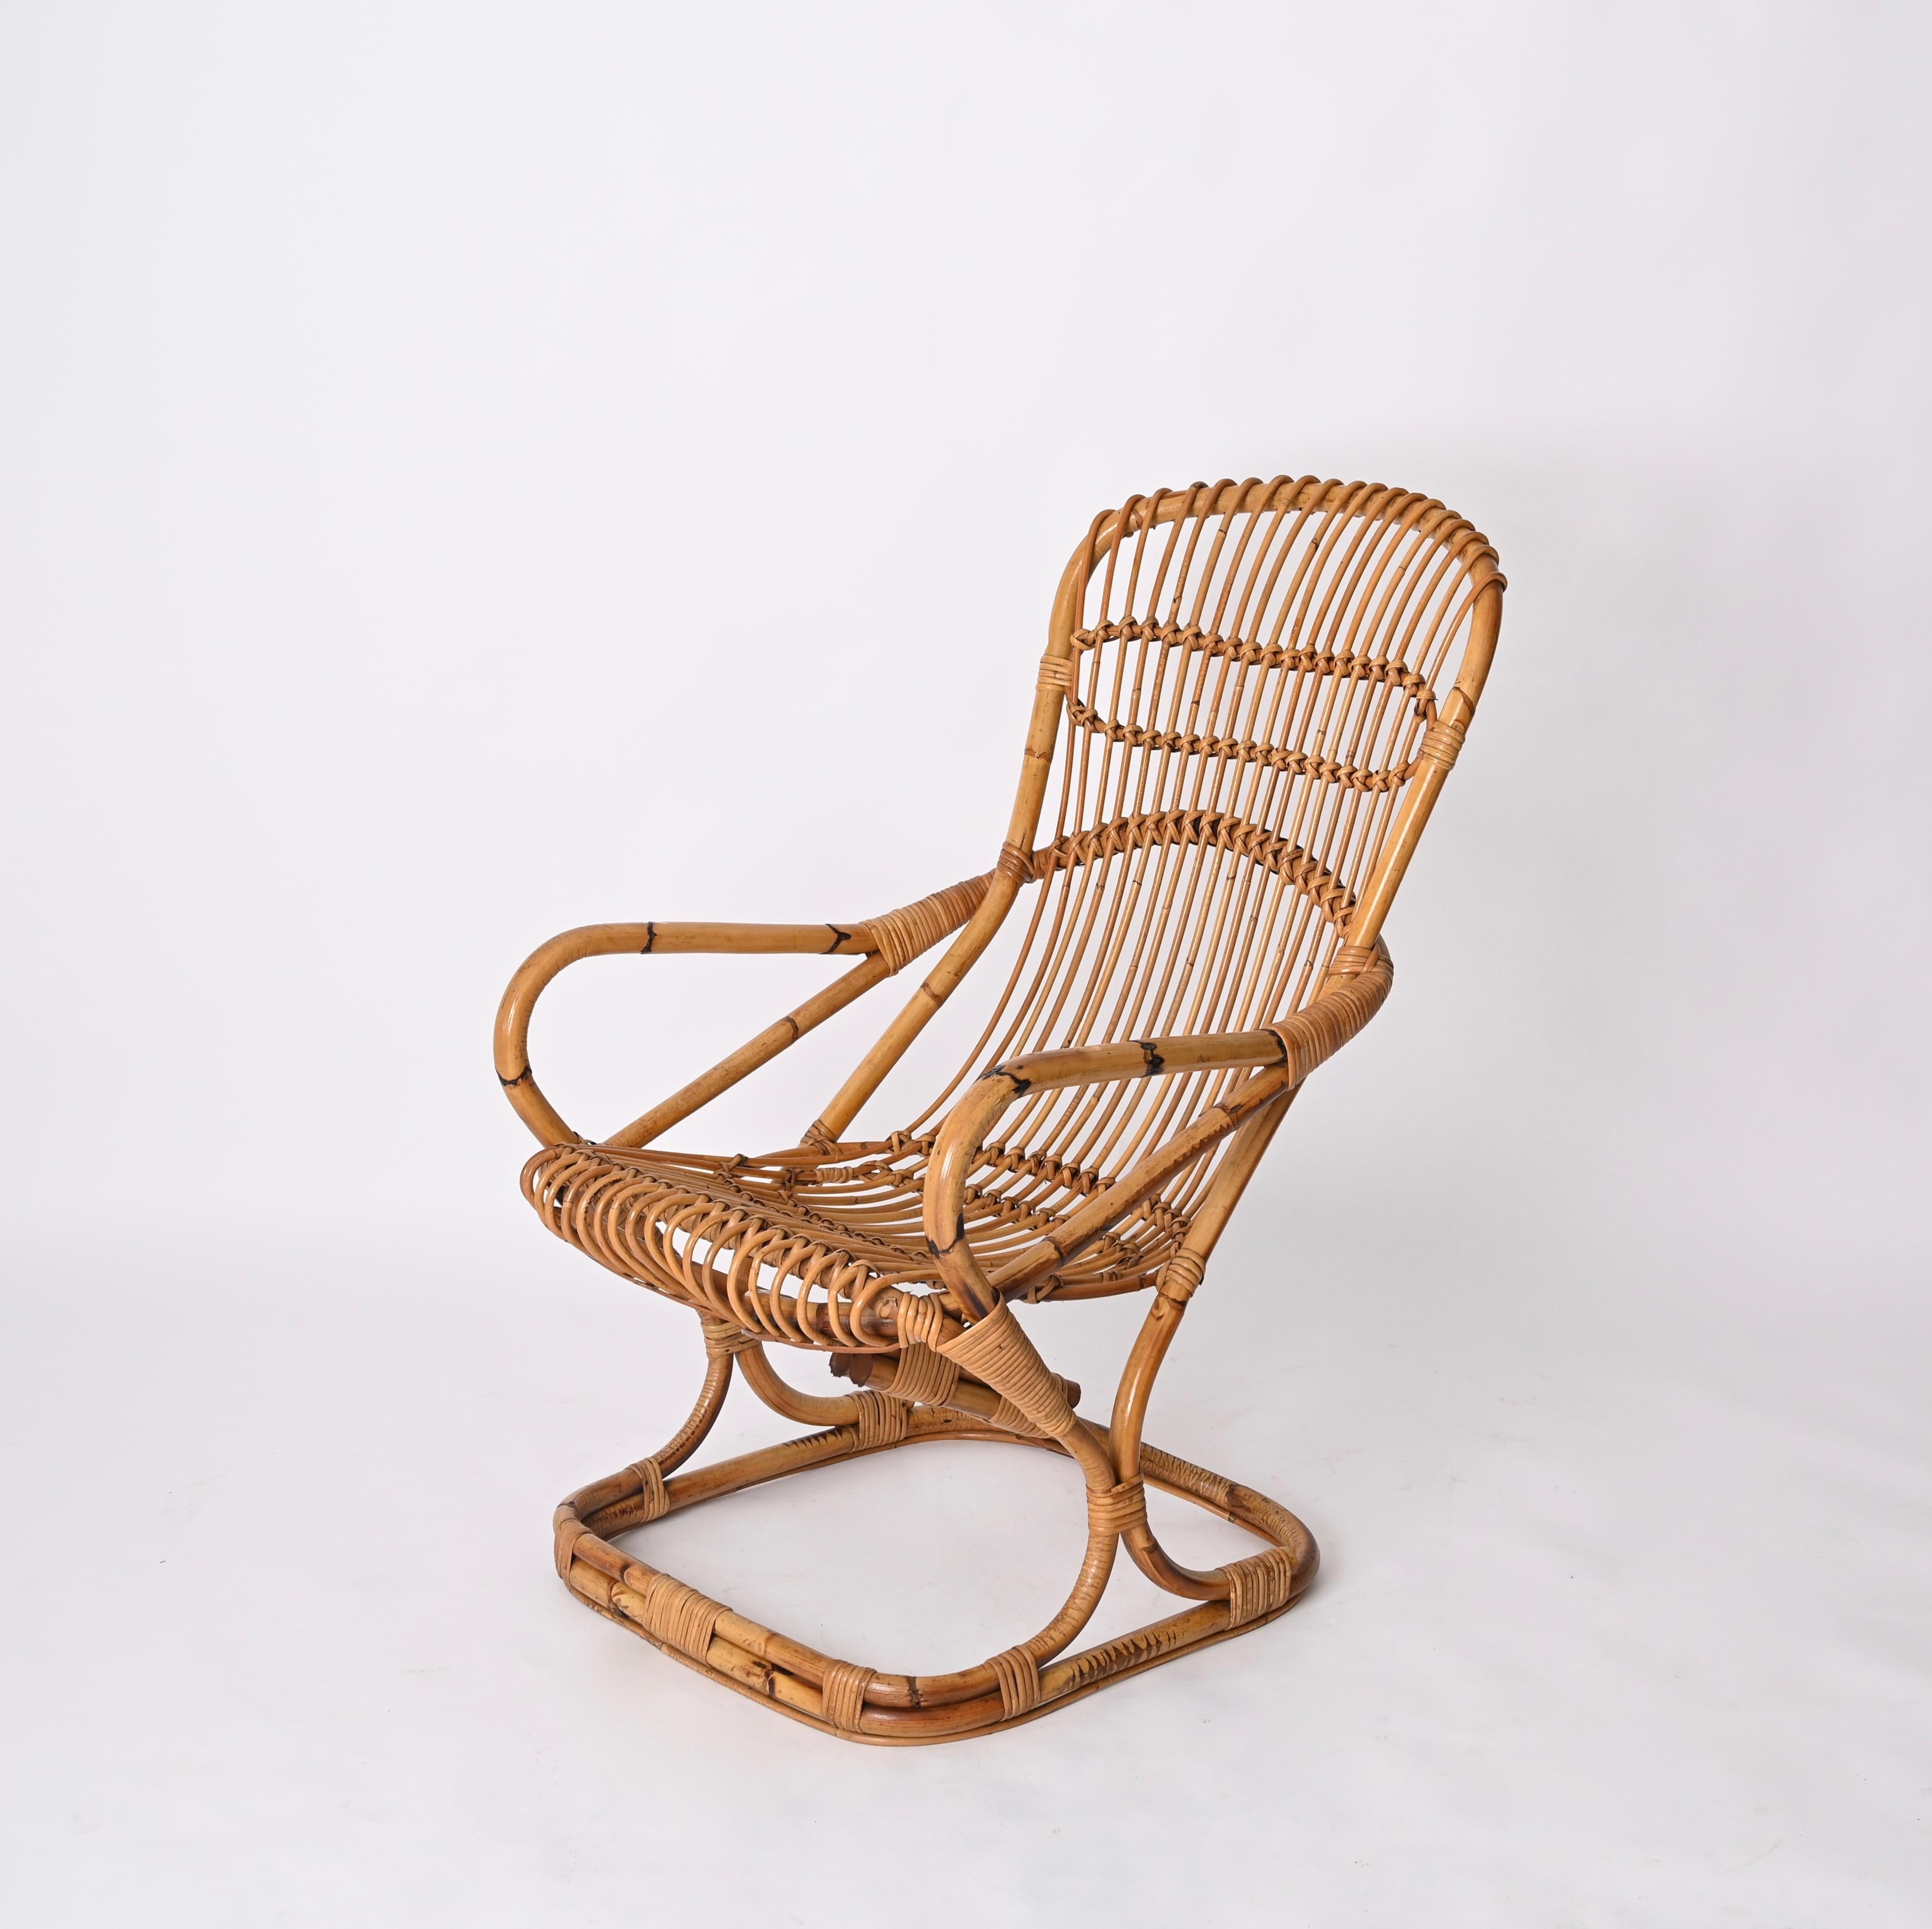 Incredible pair of Mid-Century Modern armchairs fully made in bamboo, curved rattan and hand-woven wicker. These majestic armchairs were designed by Tito Agnoli and produced in Italy dutinh the 1960s.

The armchairs are in excelent conditions. Fully